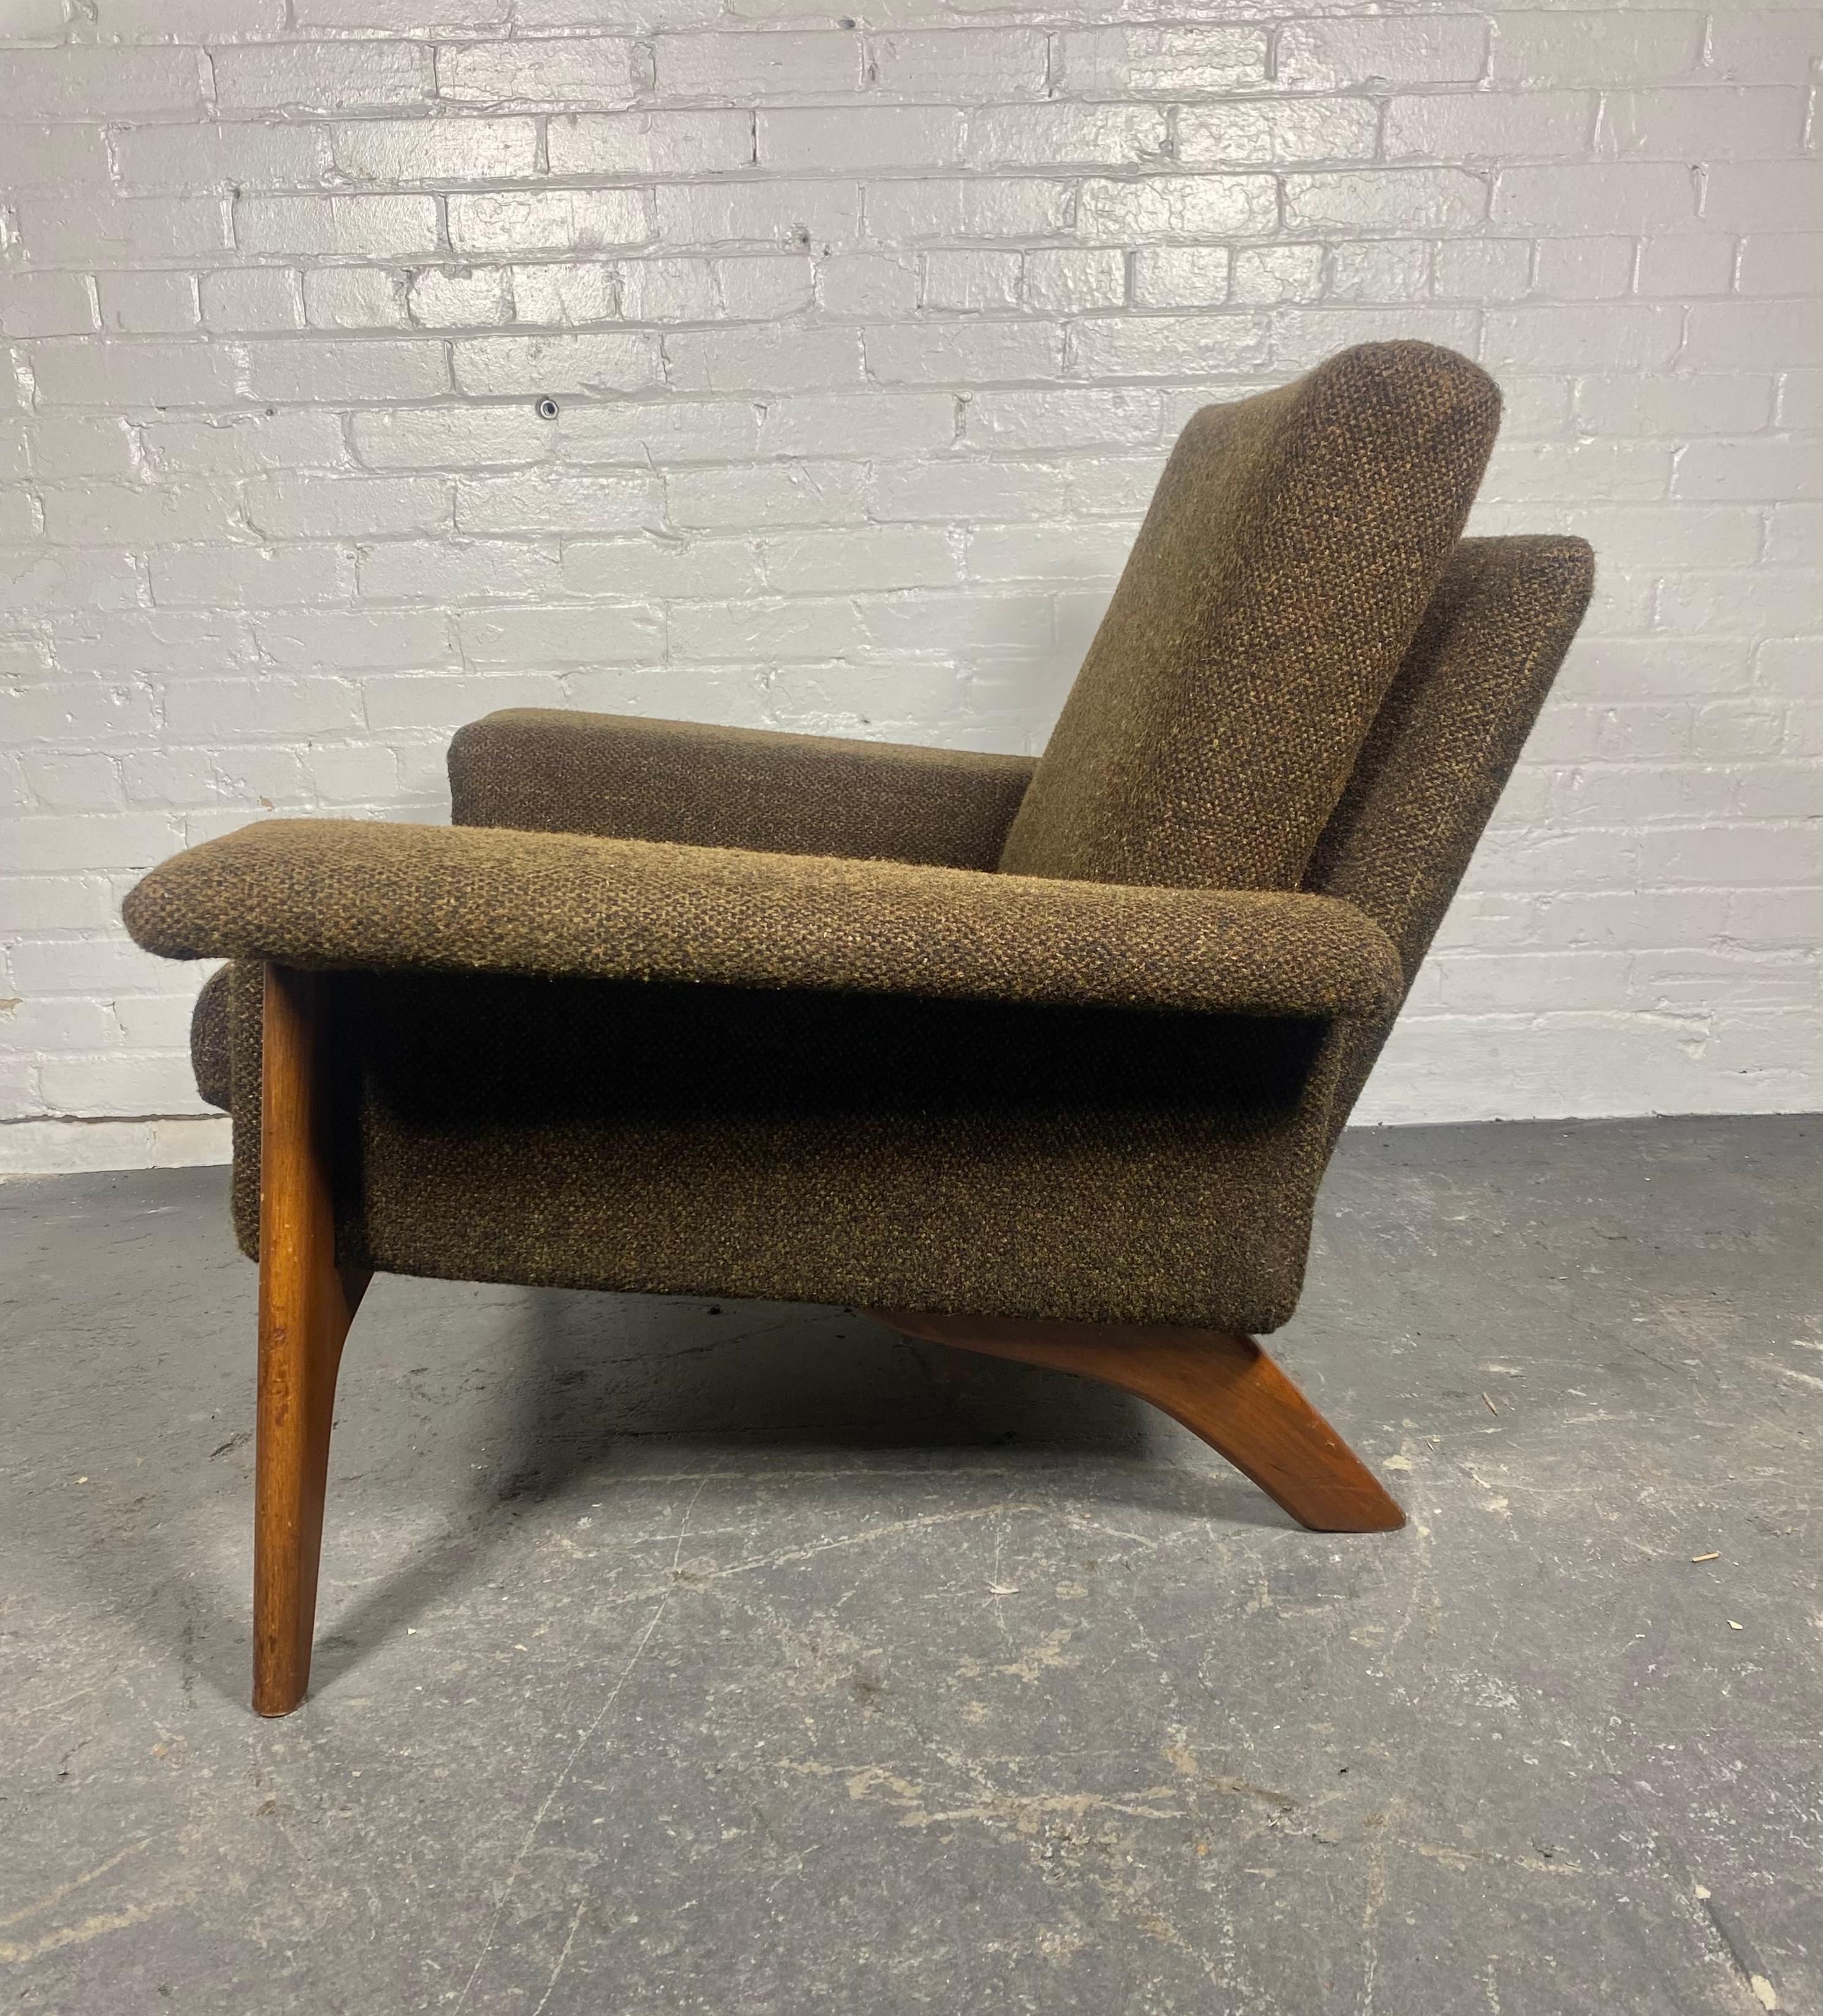 Fabric Dramatic Modernist Lounge Chair by Adrian Pearsall.Sculptural Walnut Base. For Sale